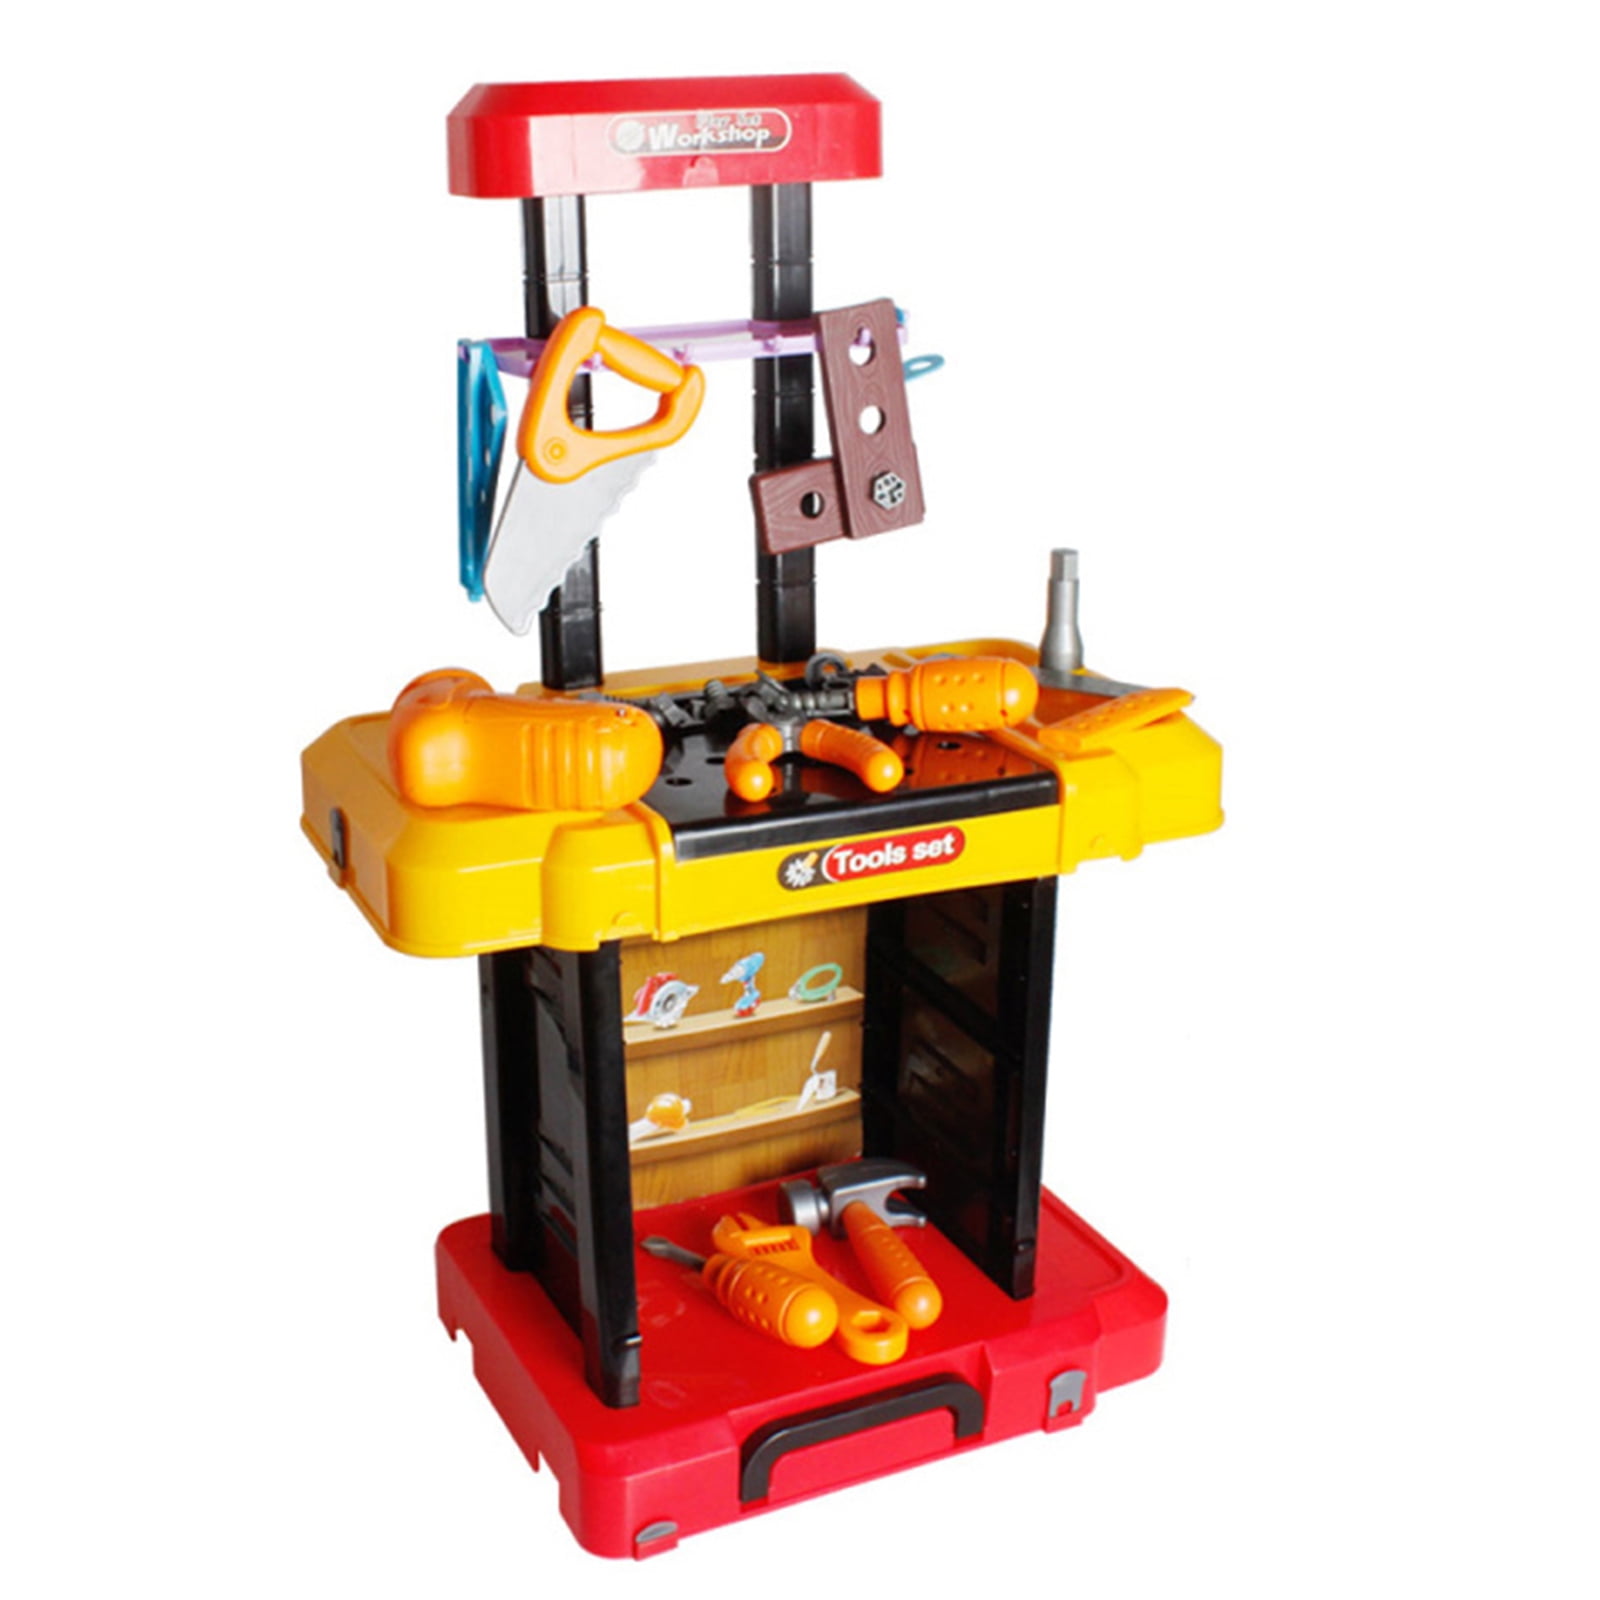 Kids Toy Workshop Tool Bench PS181 NEW 